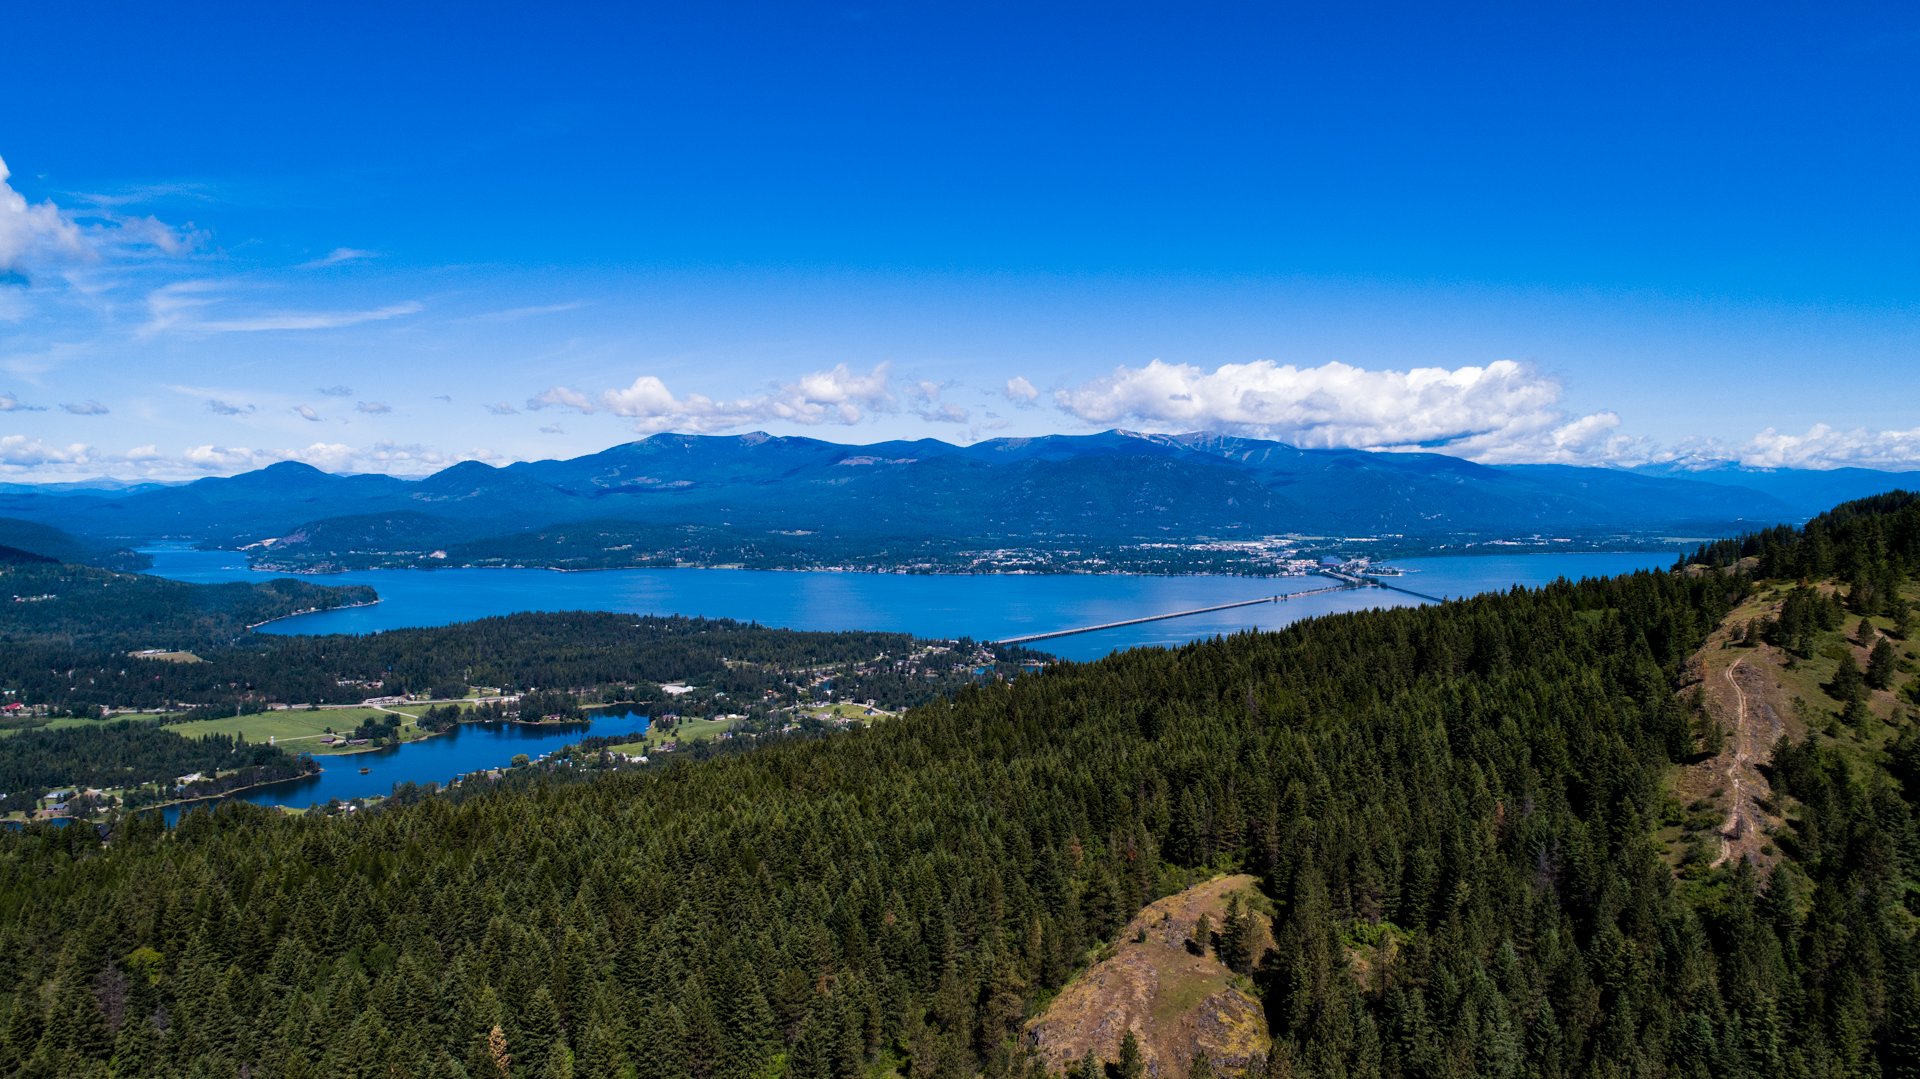 Lake Pend Oreille and Sandpoint